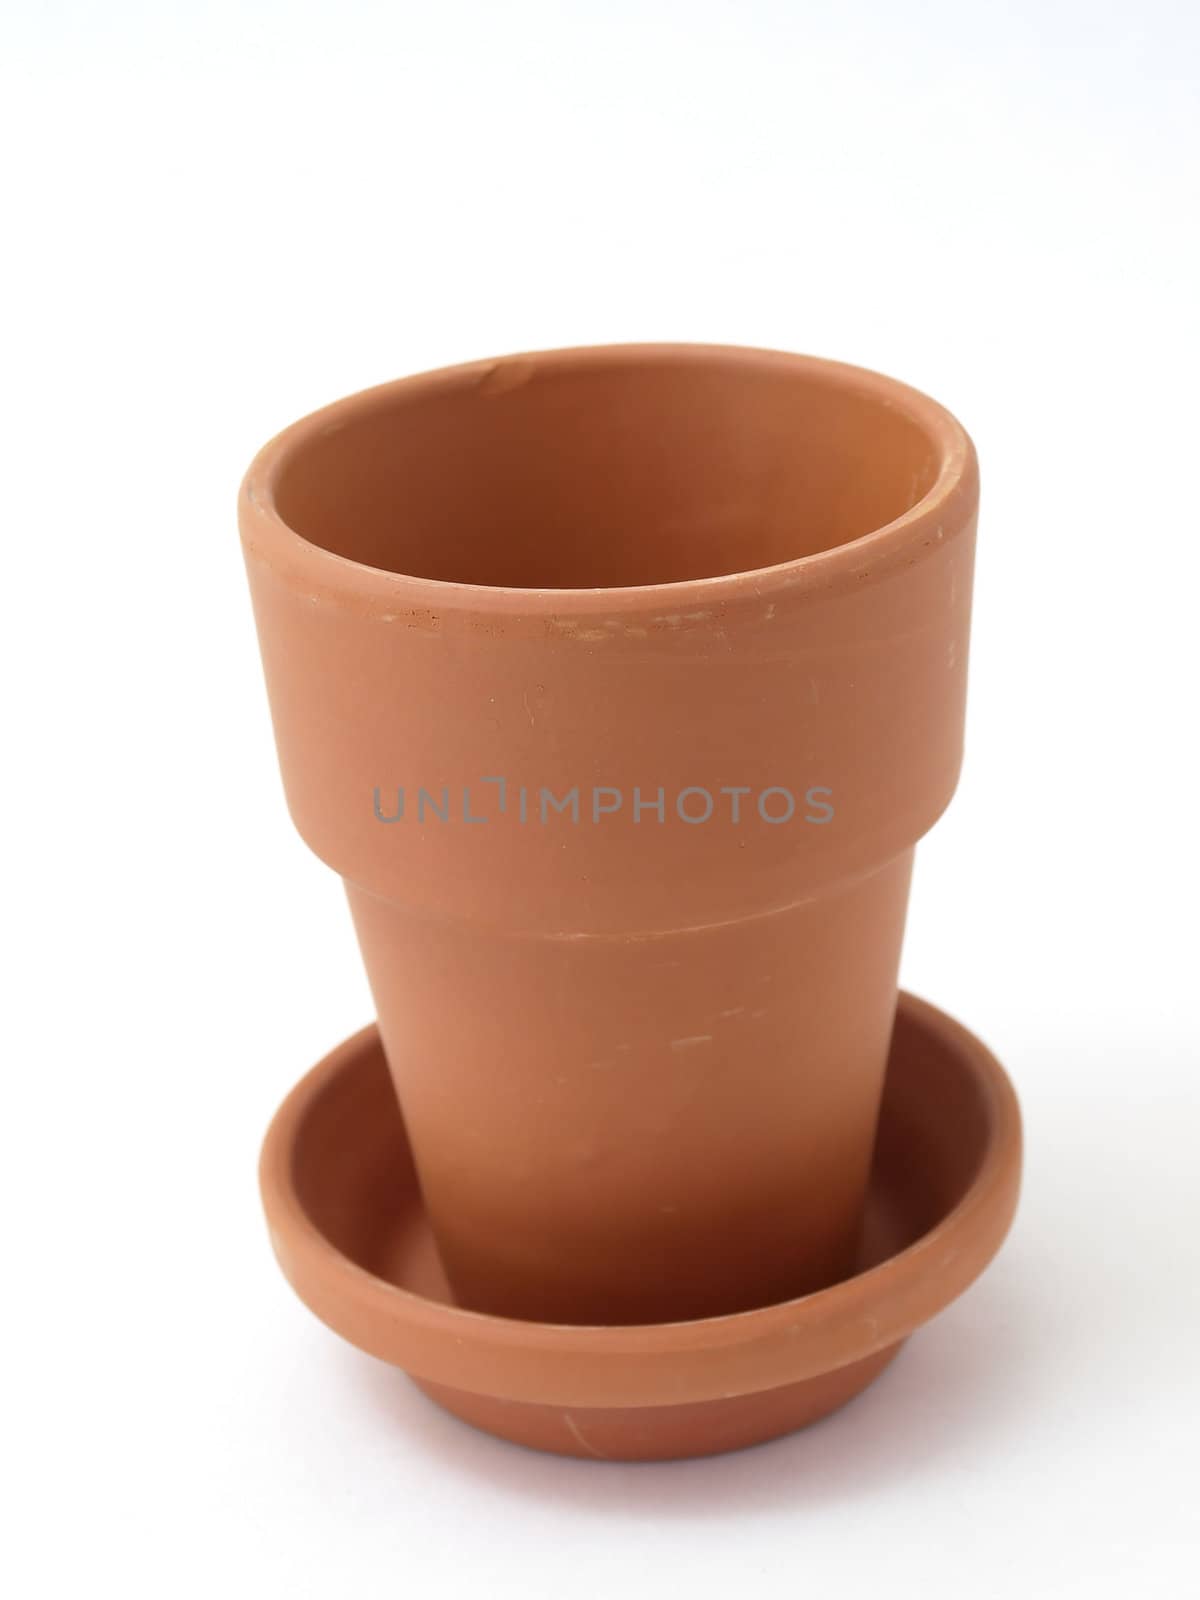 A solitary terra cotta pot studio isolated on a white background.